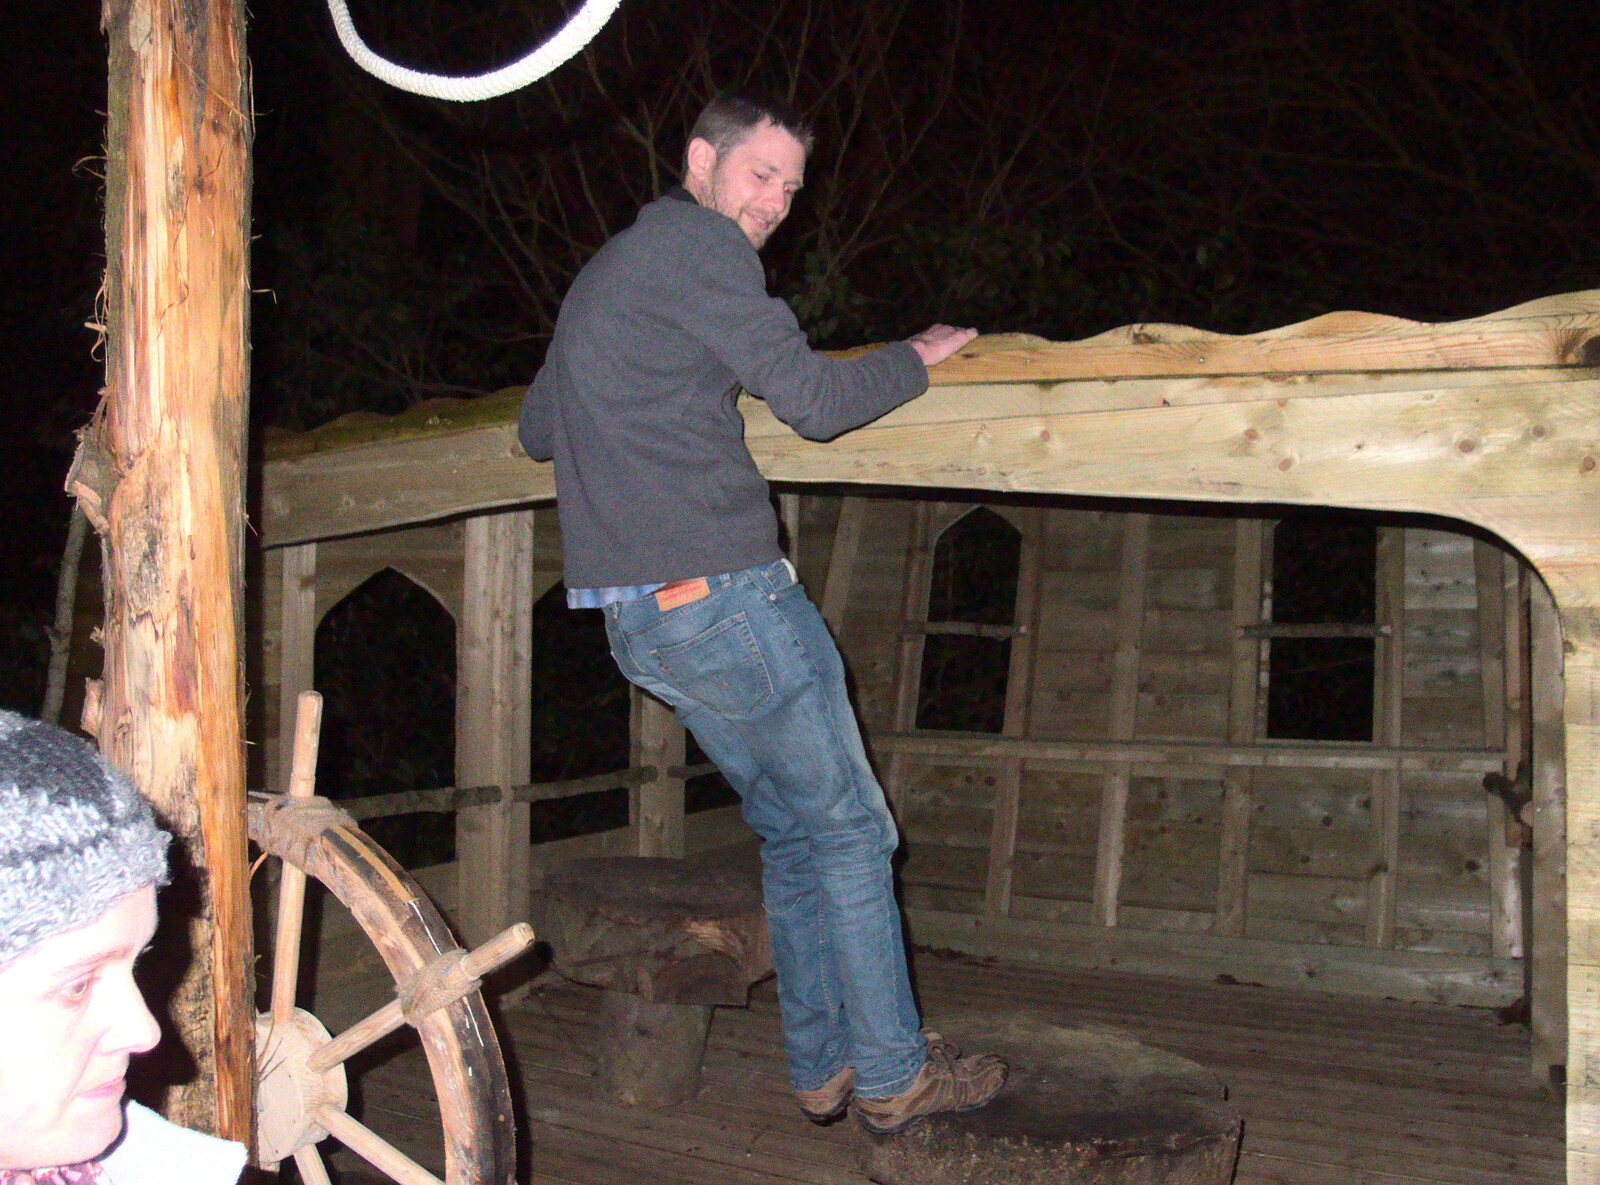 Phil climbs up from New Year's Eve at the Oaksmere, Brome, Suffolk - 31st December 2014